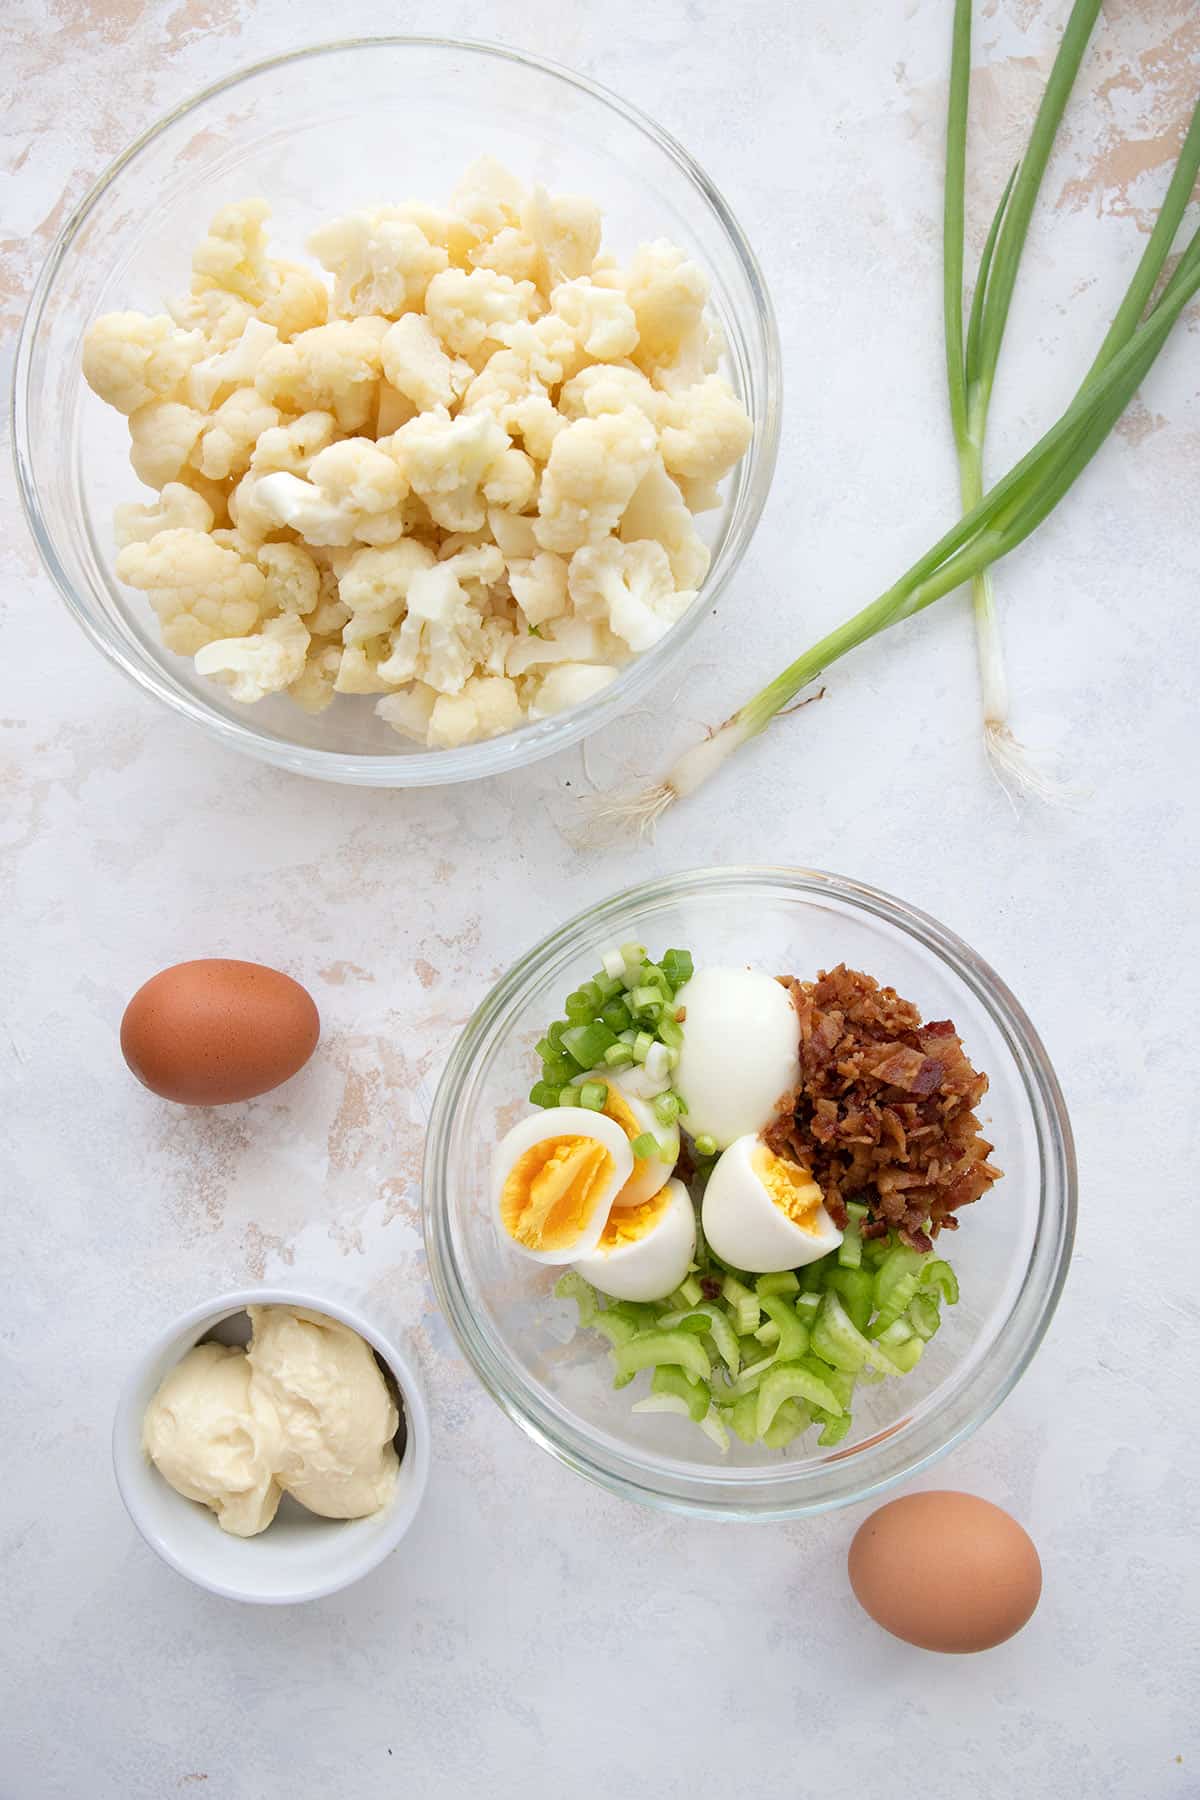 Top down image of the ingredients for keto cauliflower potato salad.